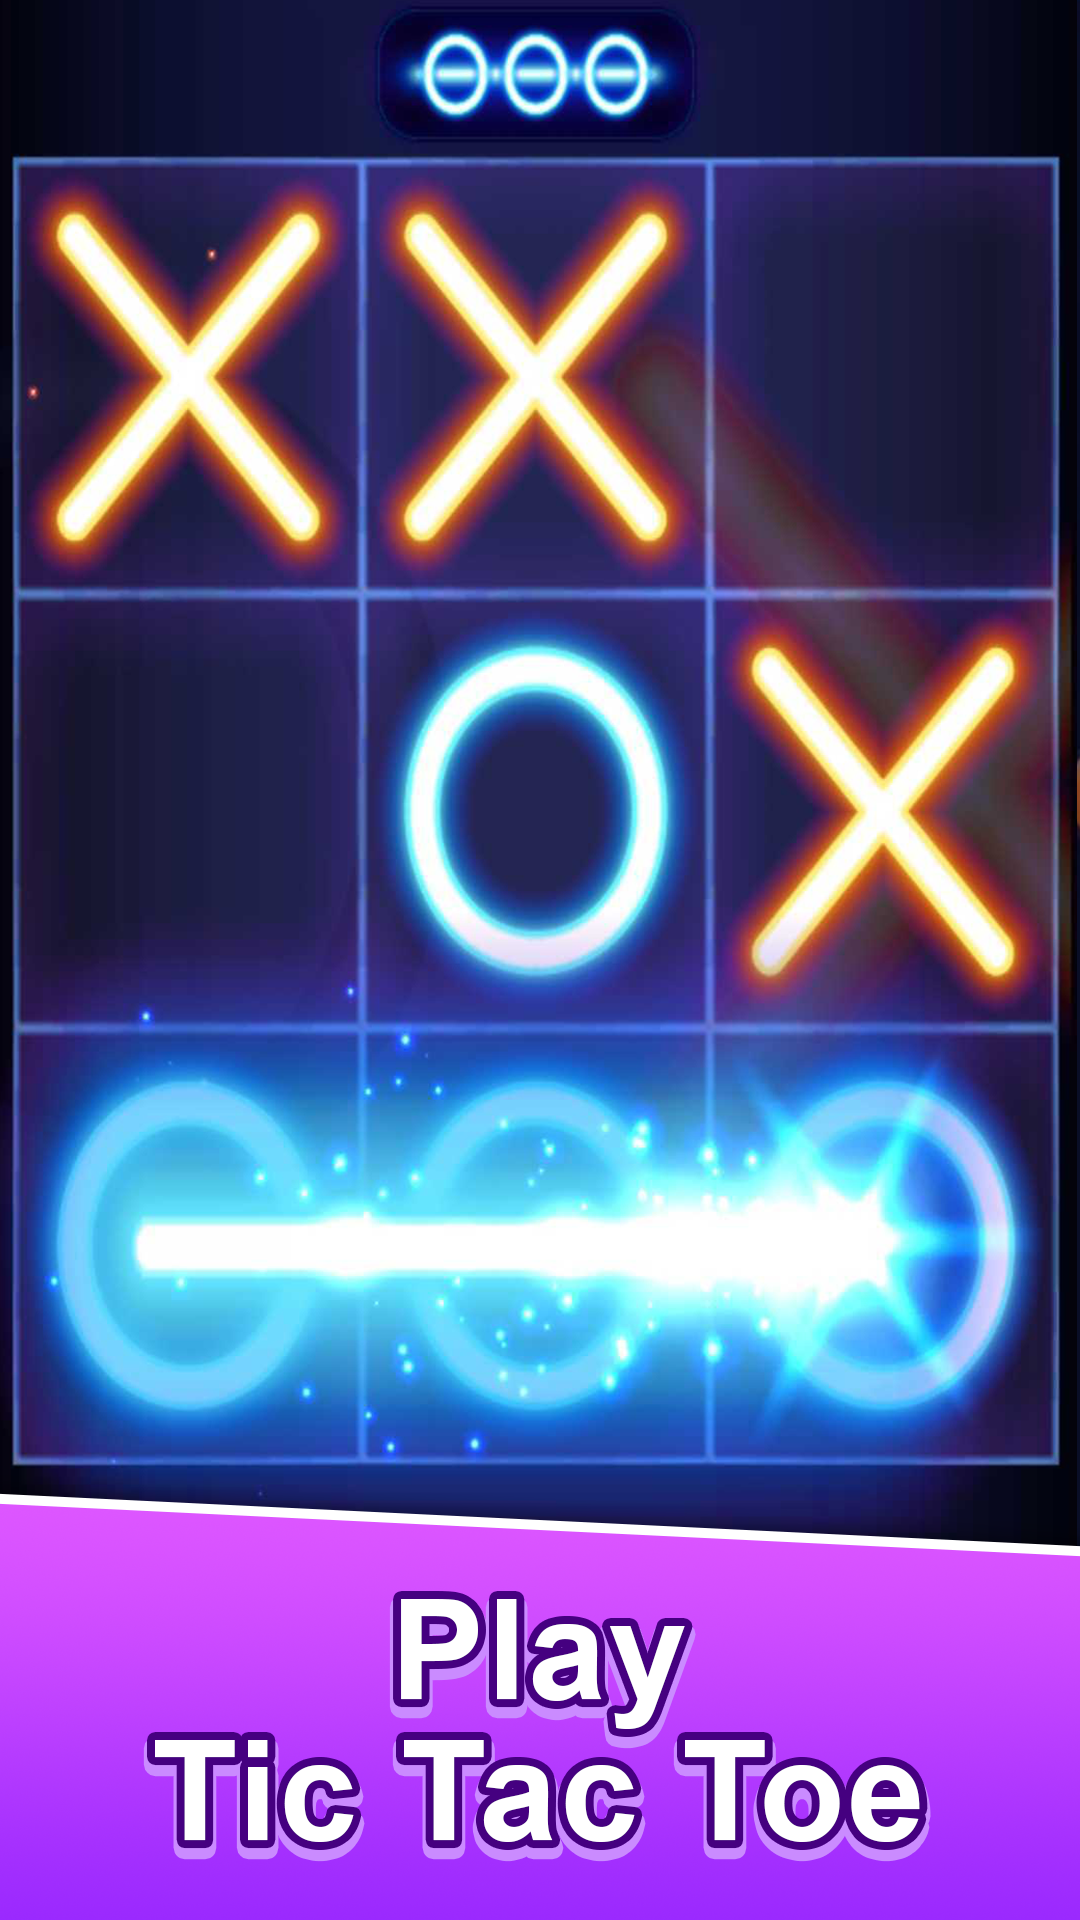 Play Tic Tac Toe - 2 Player XO Online for Free on PC & Mobile